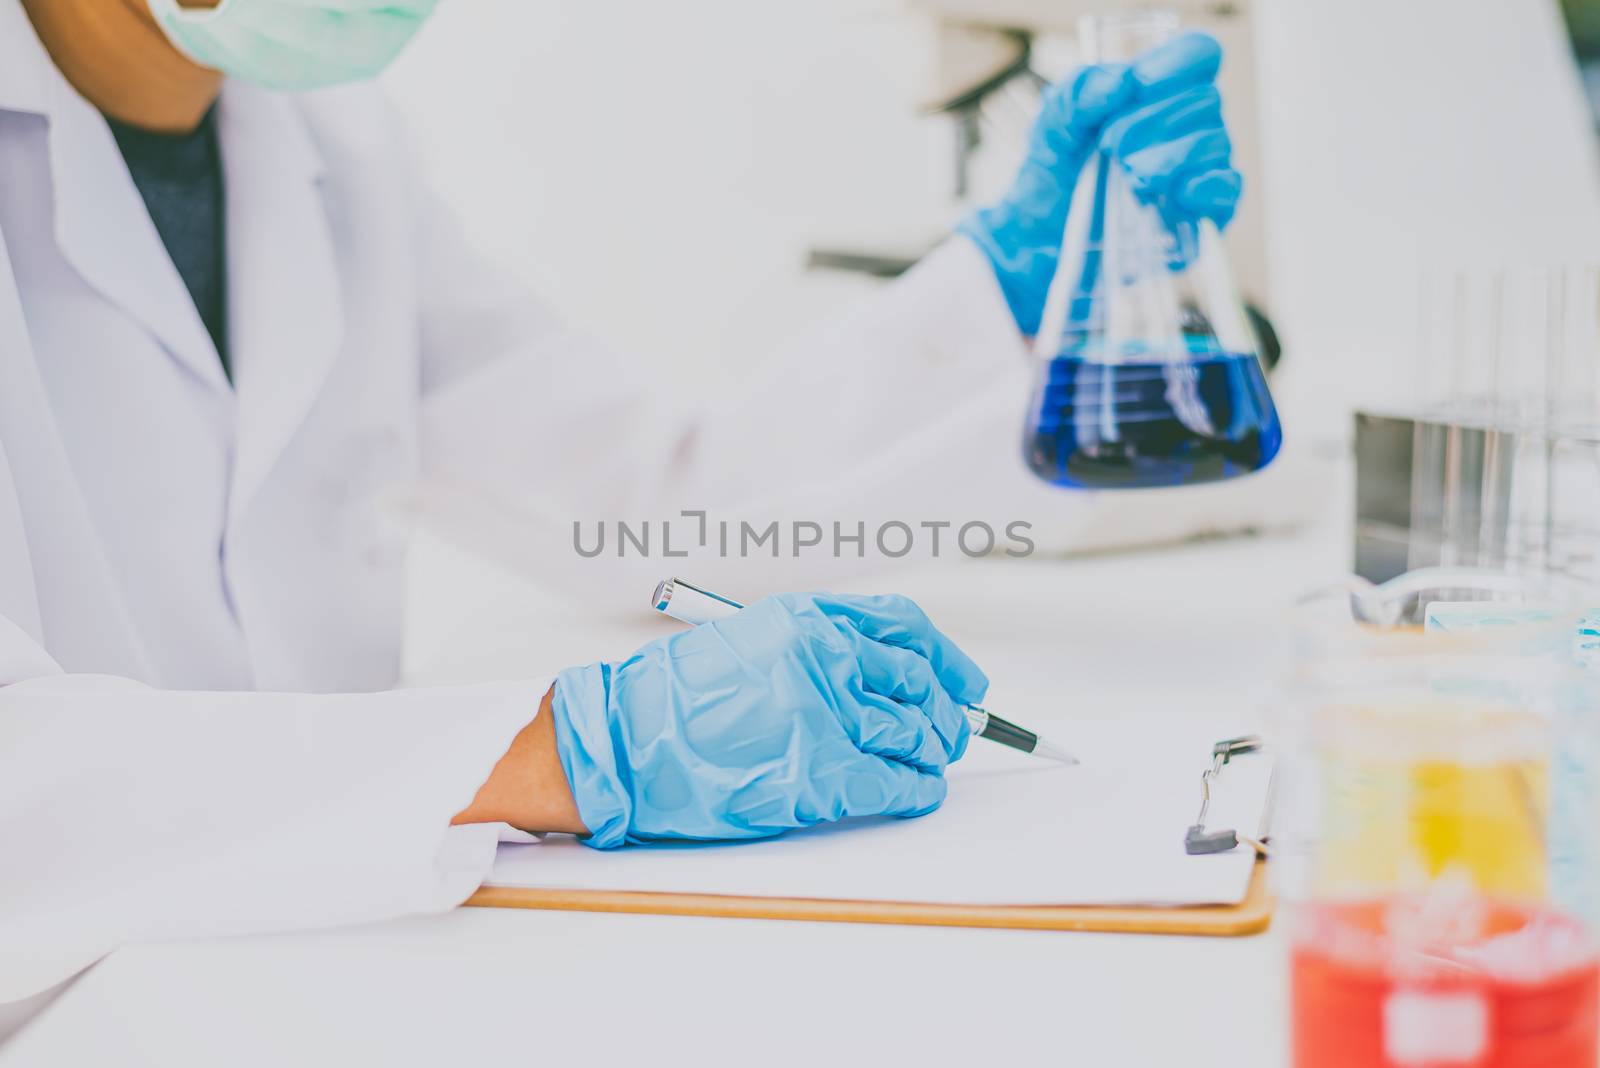  The scientist is recording the scientific value on a note. In a by photobyphotoboy